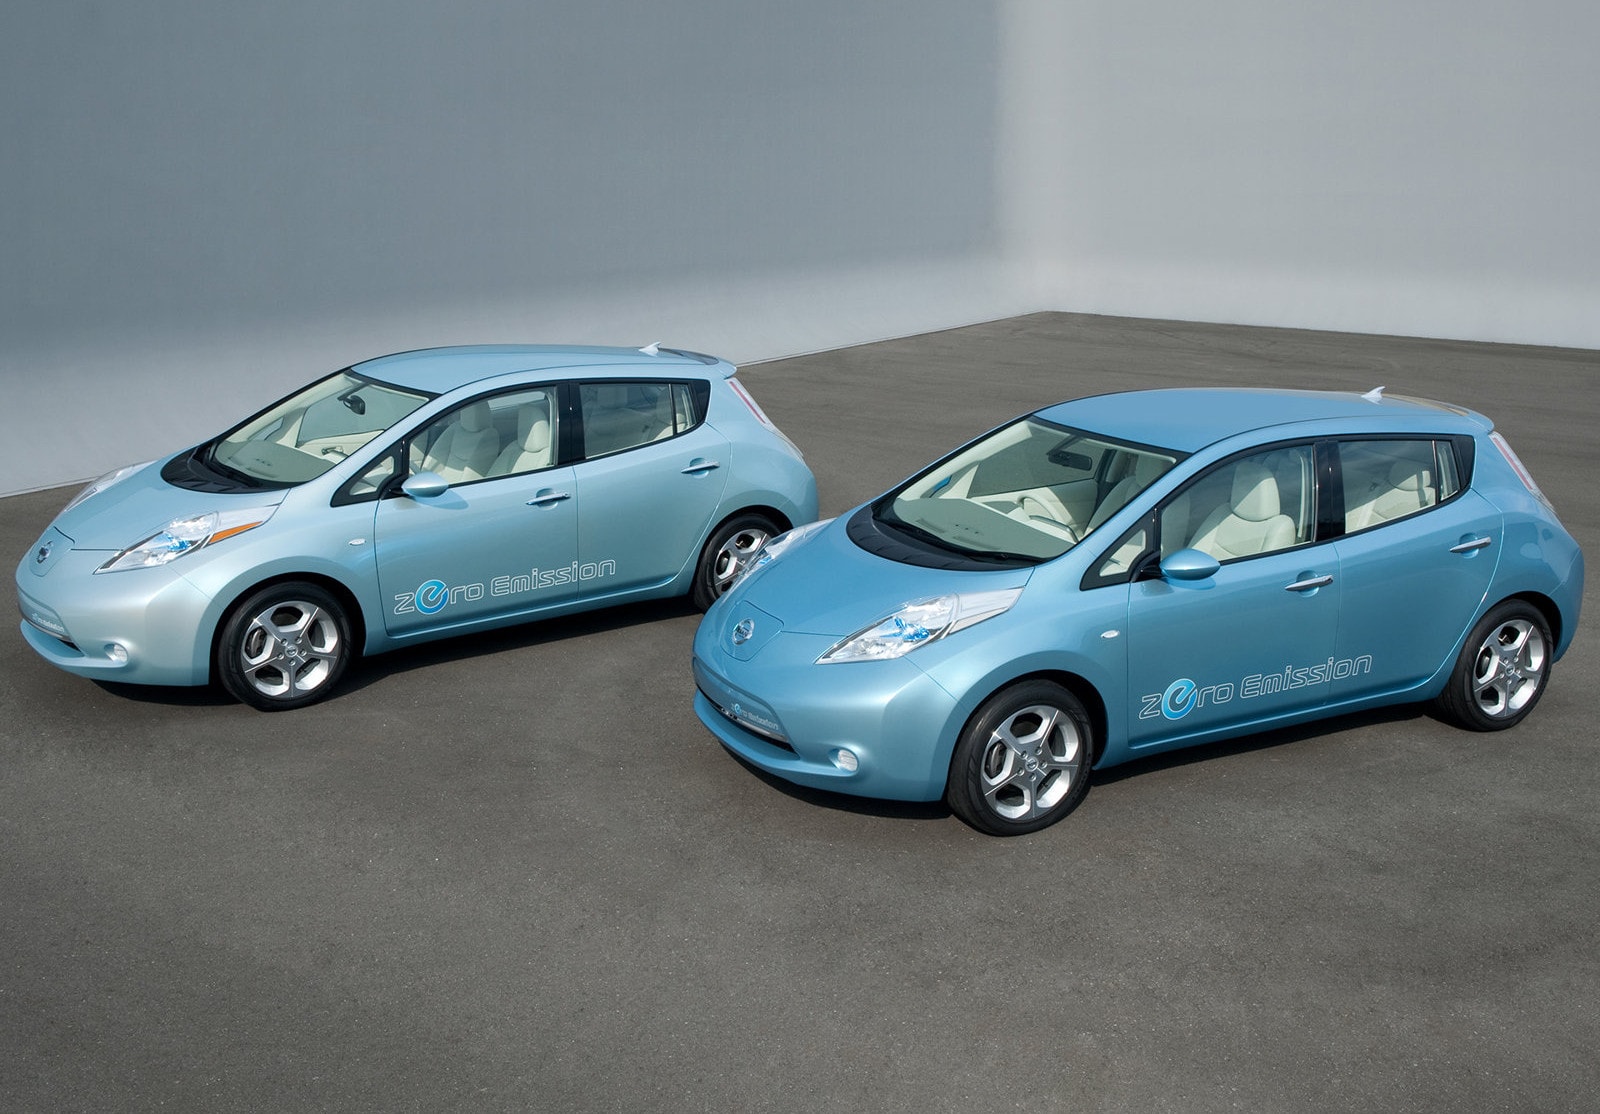 Chevy volt and nissan leaf